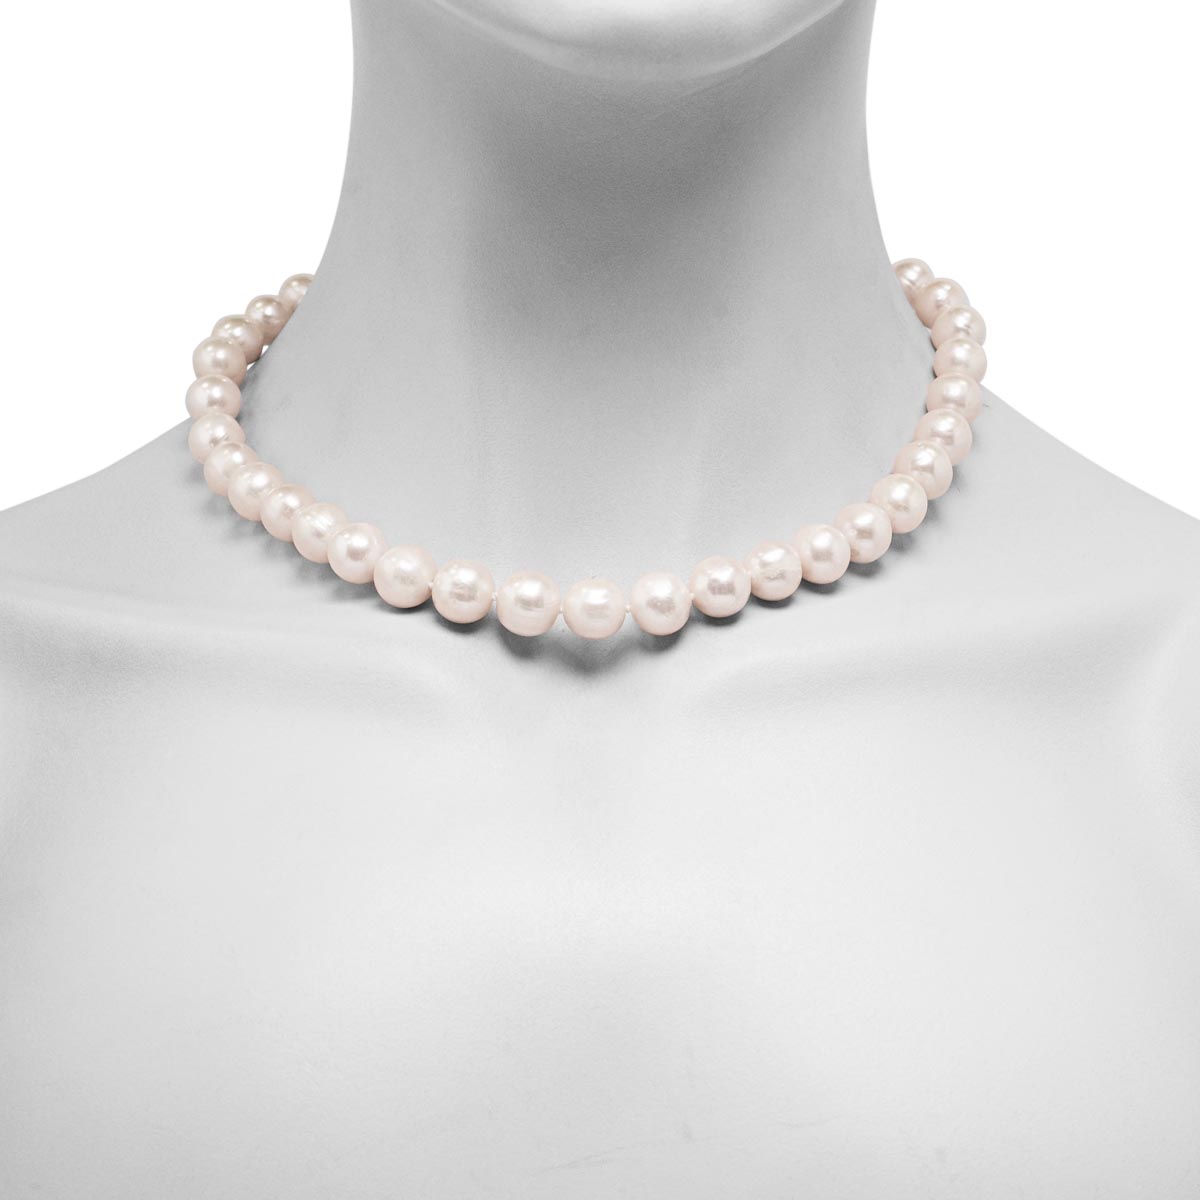 Cultured Freshwater Pearl Earrings and Necklace Set in Sterling Silver (11-12mm pearls)